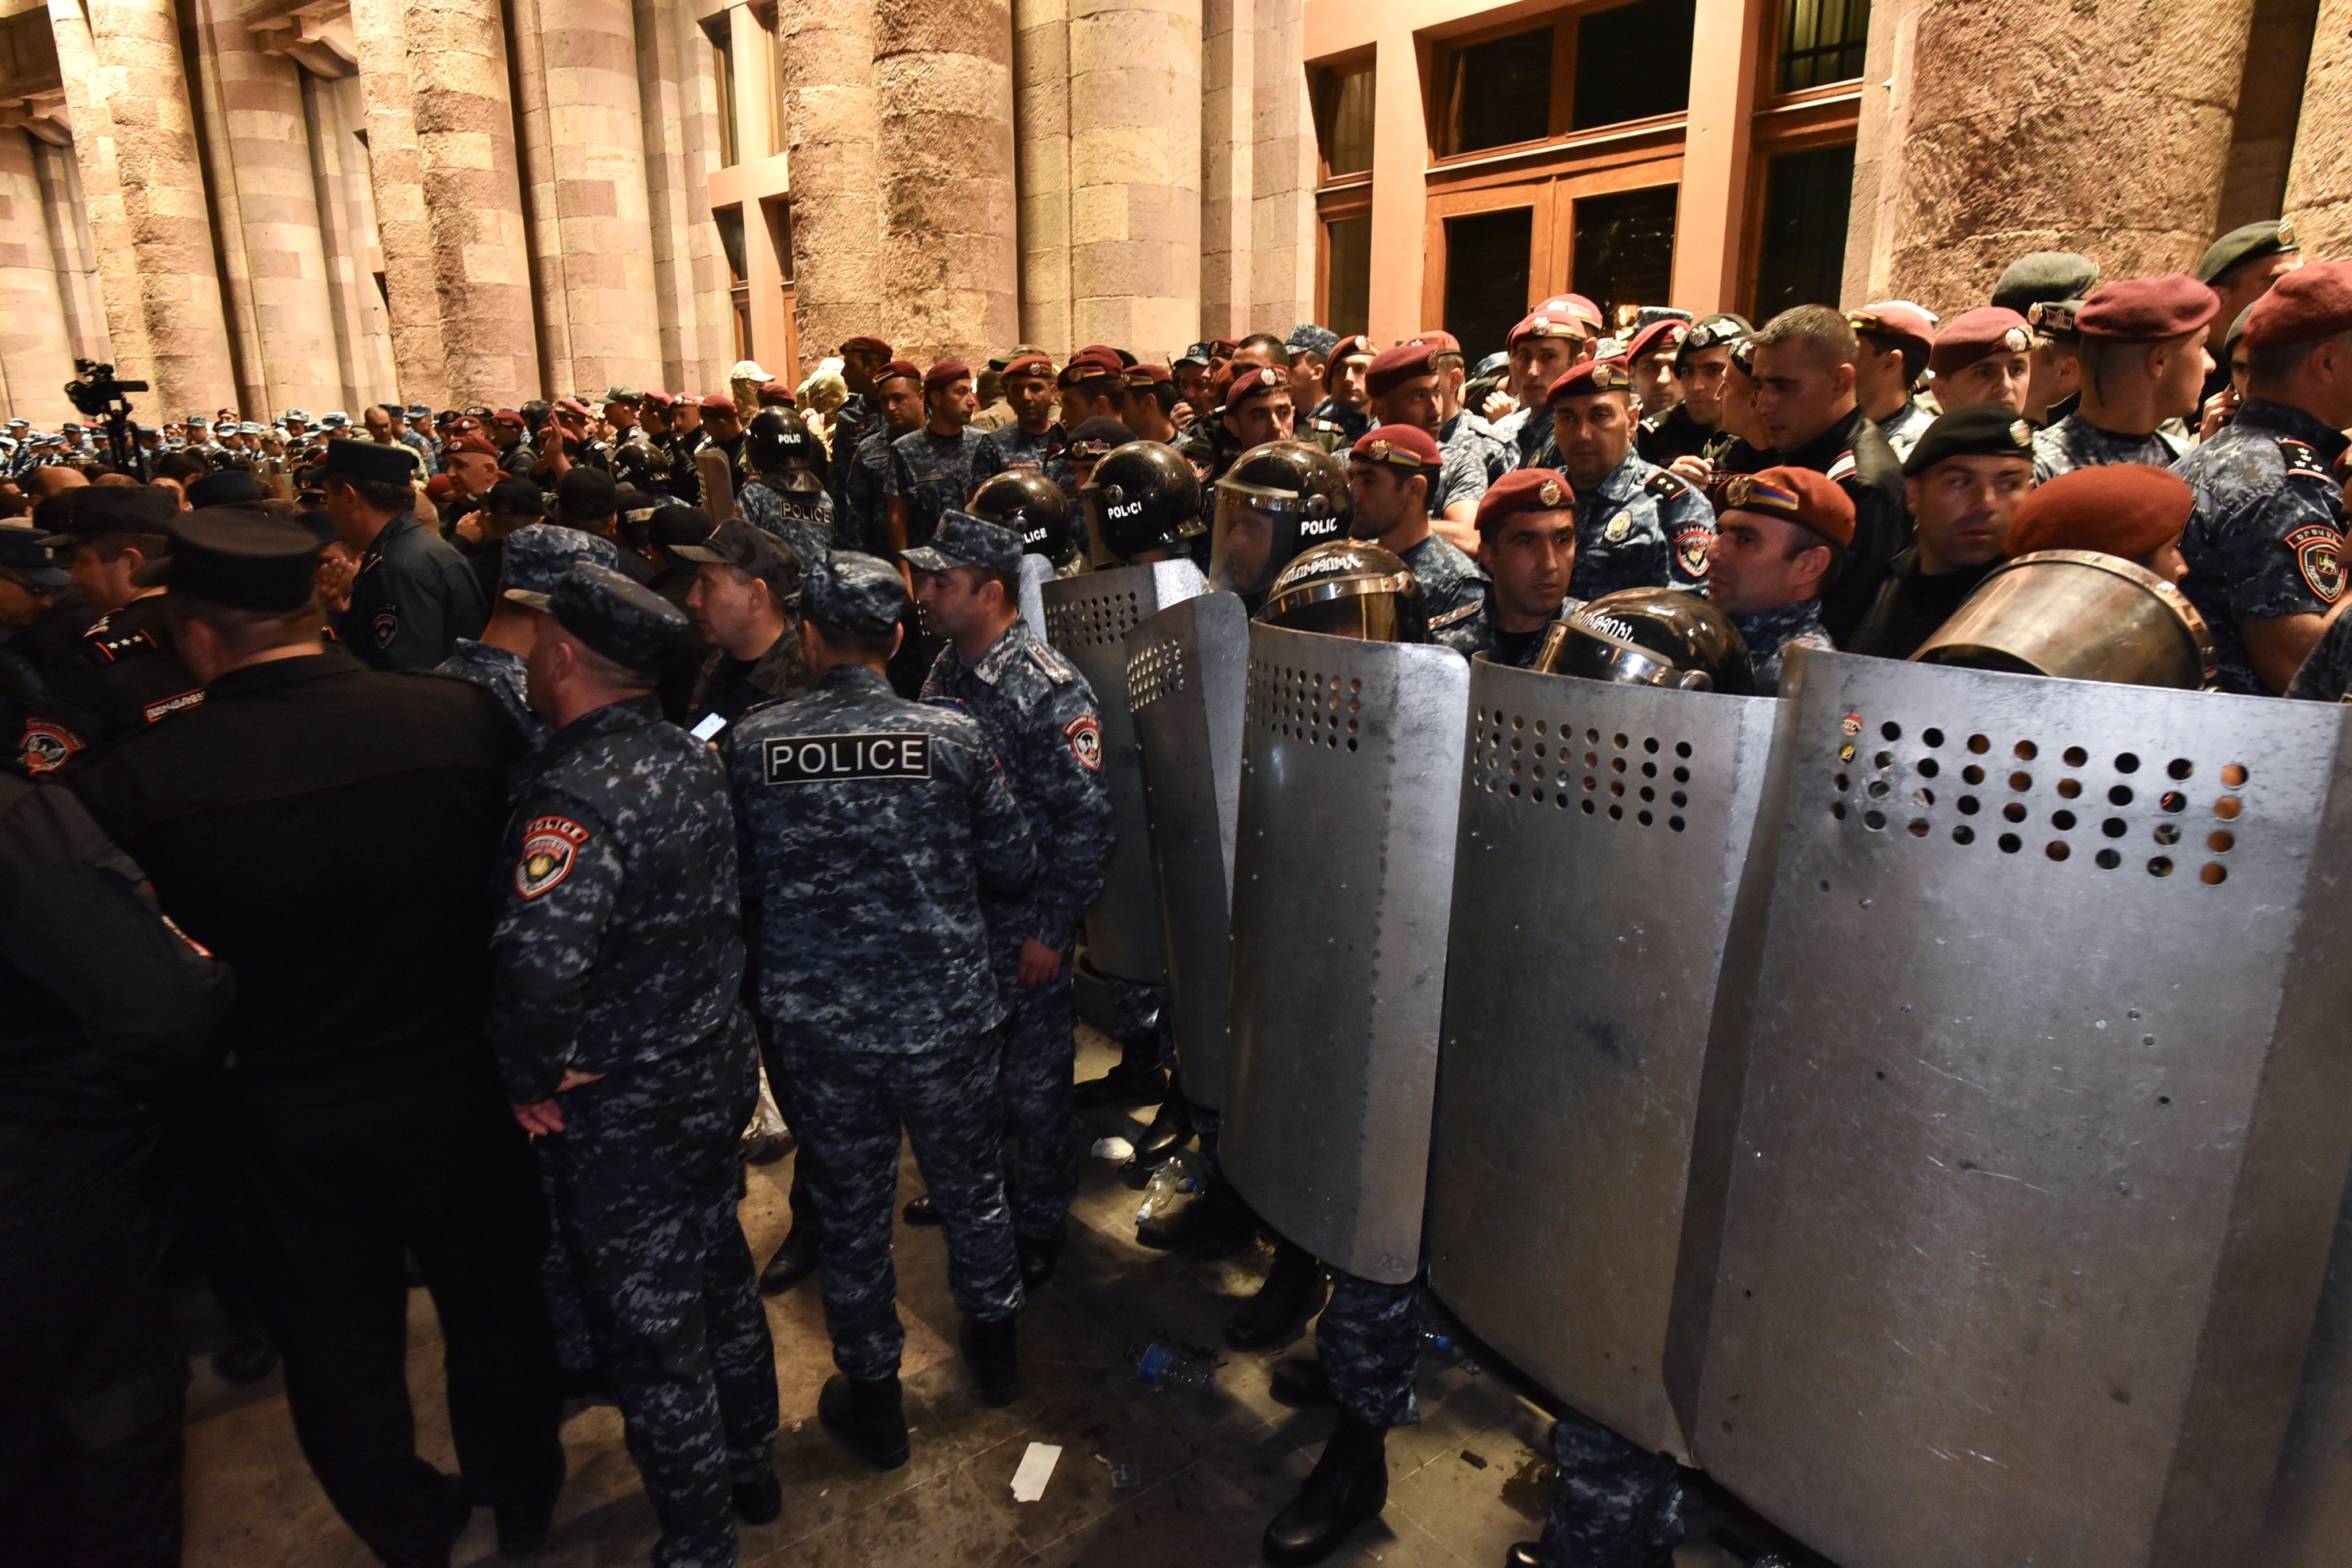 Armenian police stand guard as protesters gather outside the government building during a protest against Azerbaijan’s military actions in the Nagorno-Karabakh region on September 19 – the day before a ceasefire was announced. Photo: EPA-EFE